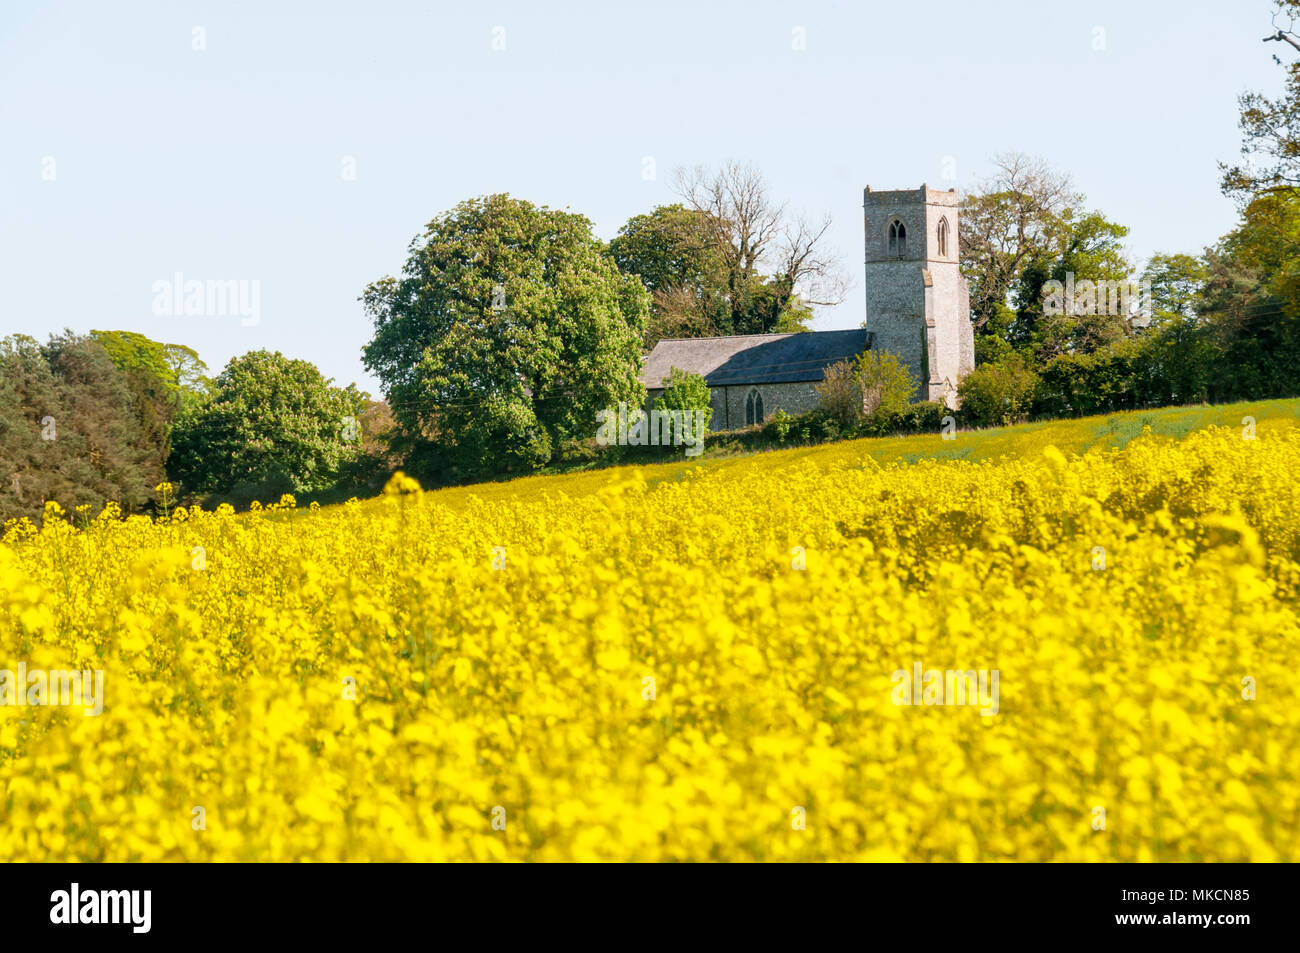 The church of All Saints, Fring, in north west Norfolk seen across a field of oilseed rape. Stock Photo